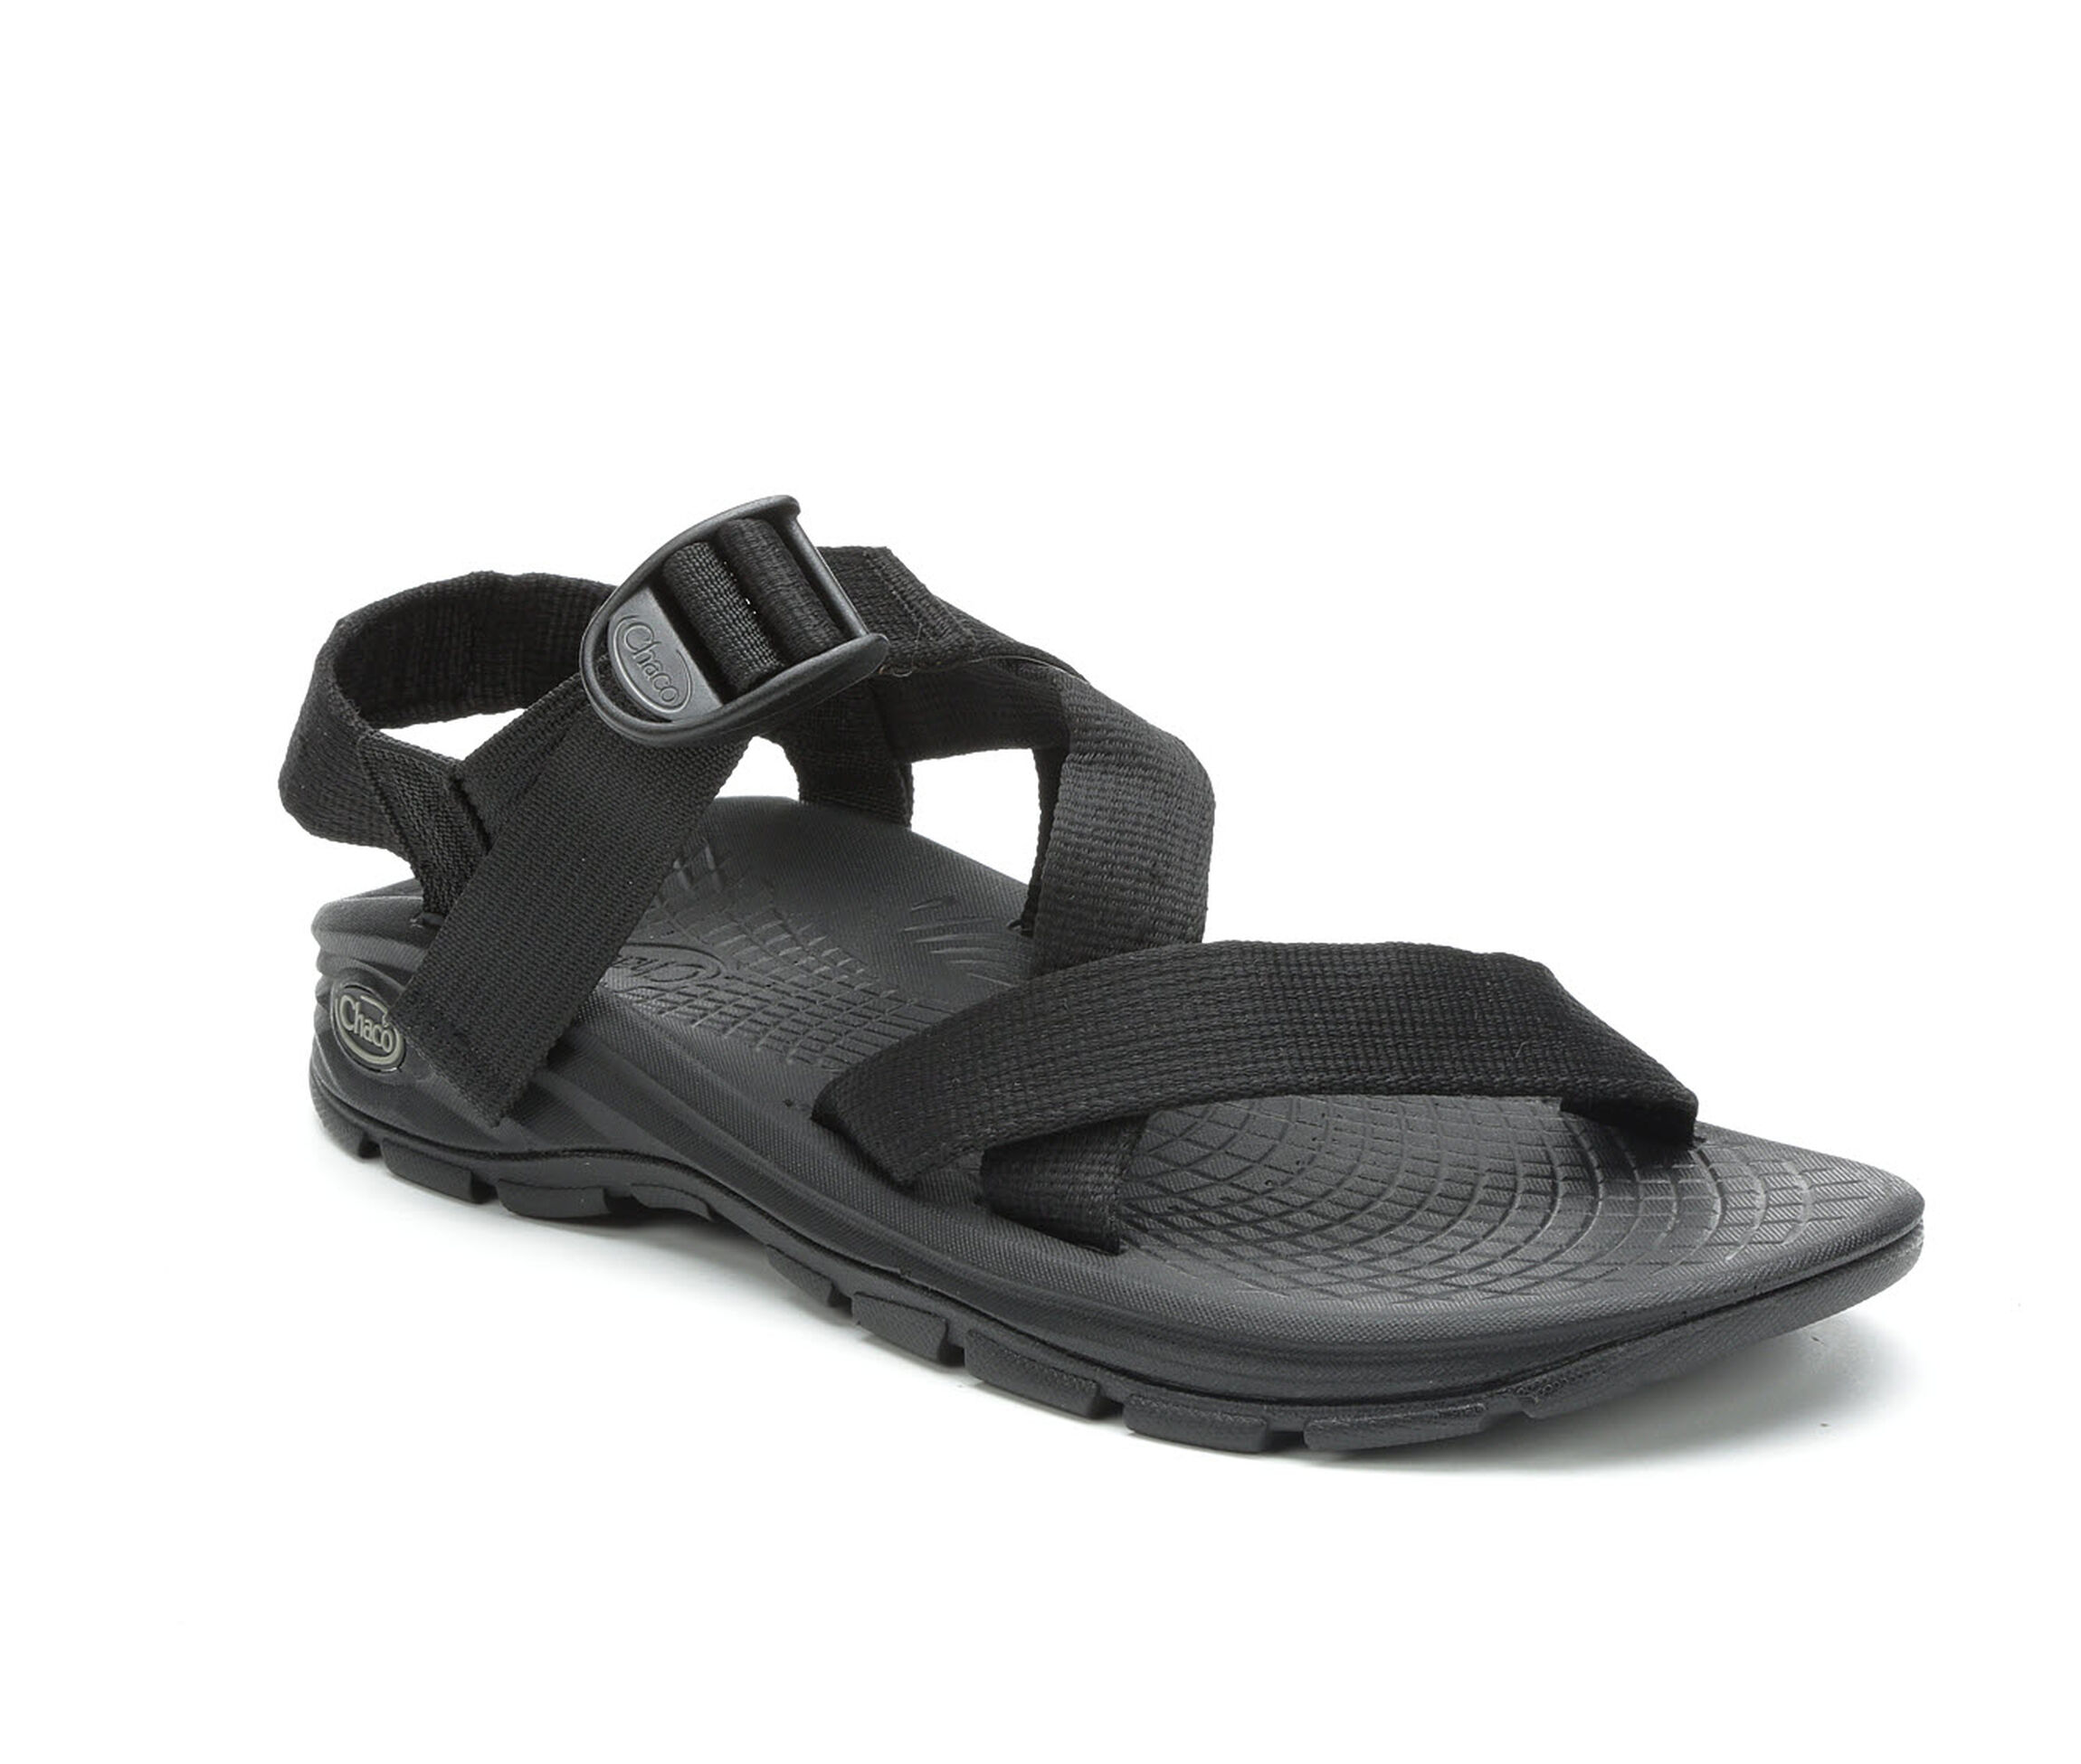 shoe carnival chacos